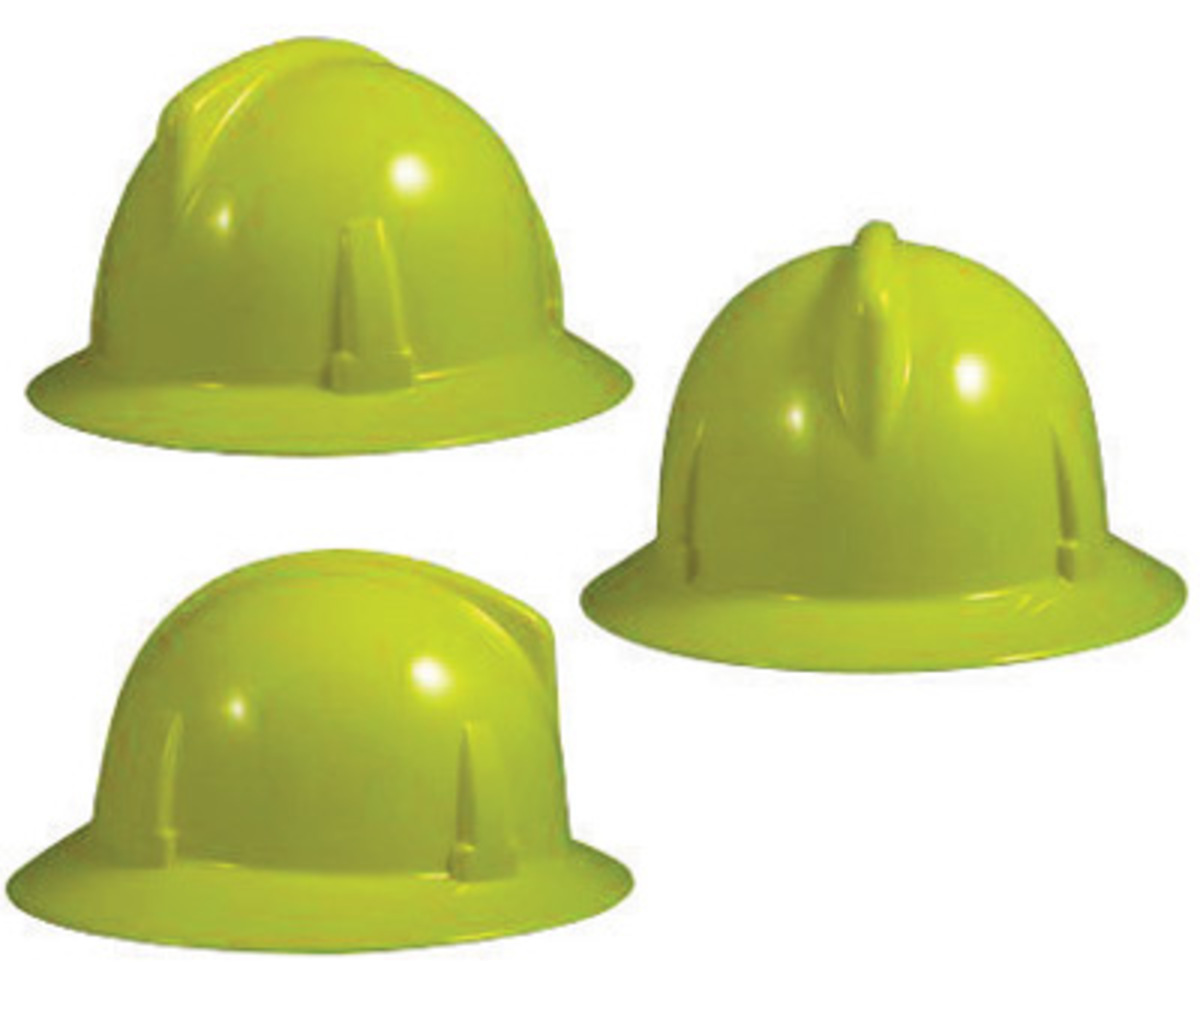 MSA Yellow Polycarbonate Full Brim Hard Hat With Ratchet/4 Point Ratchet Suspension